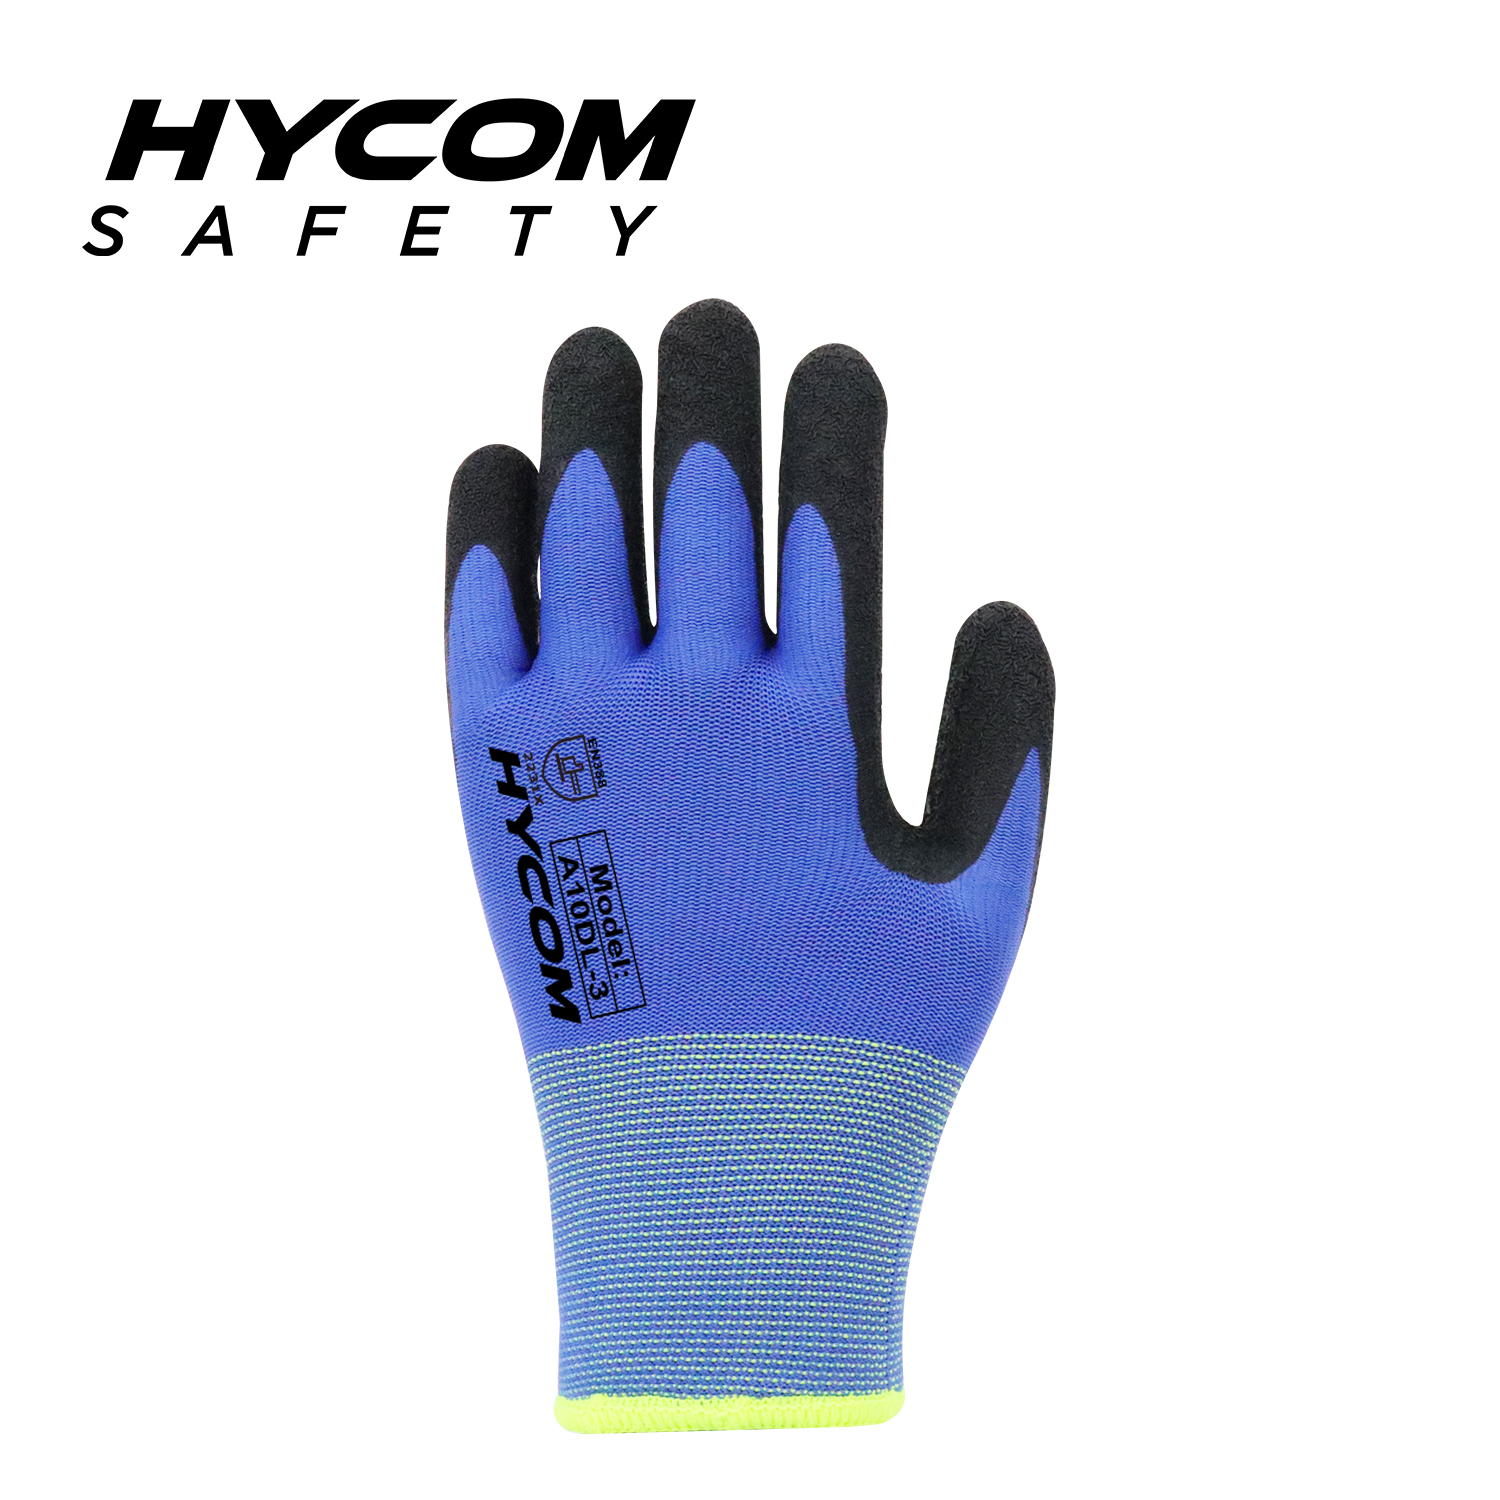 HYCOM Polyester/acrylic Fleece Thermal Glove with Palm Crinkle Latex Coating Super Grip Work Gloves